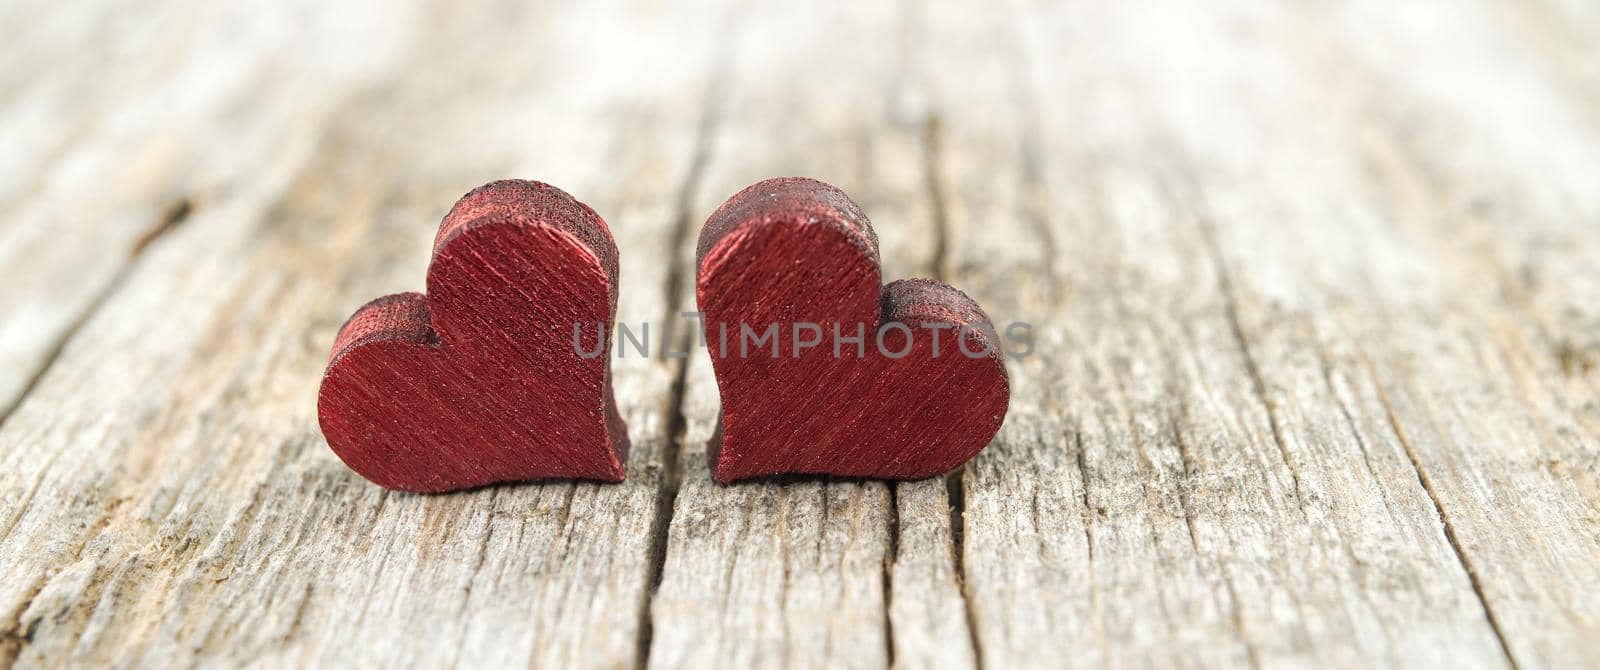 Two wooden hearts on the cracked rustic wooden table